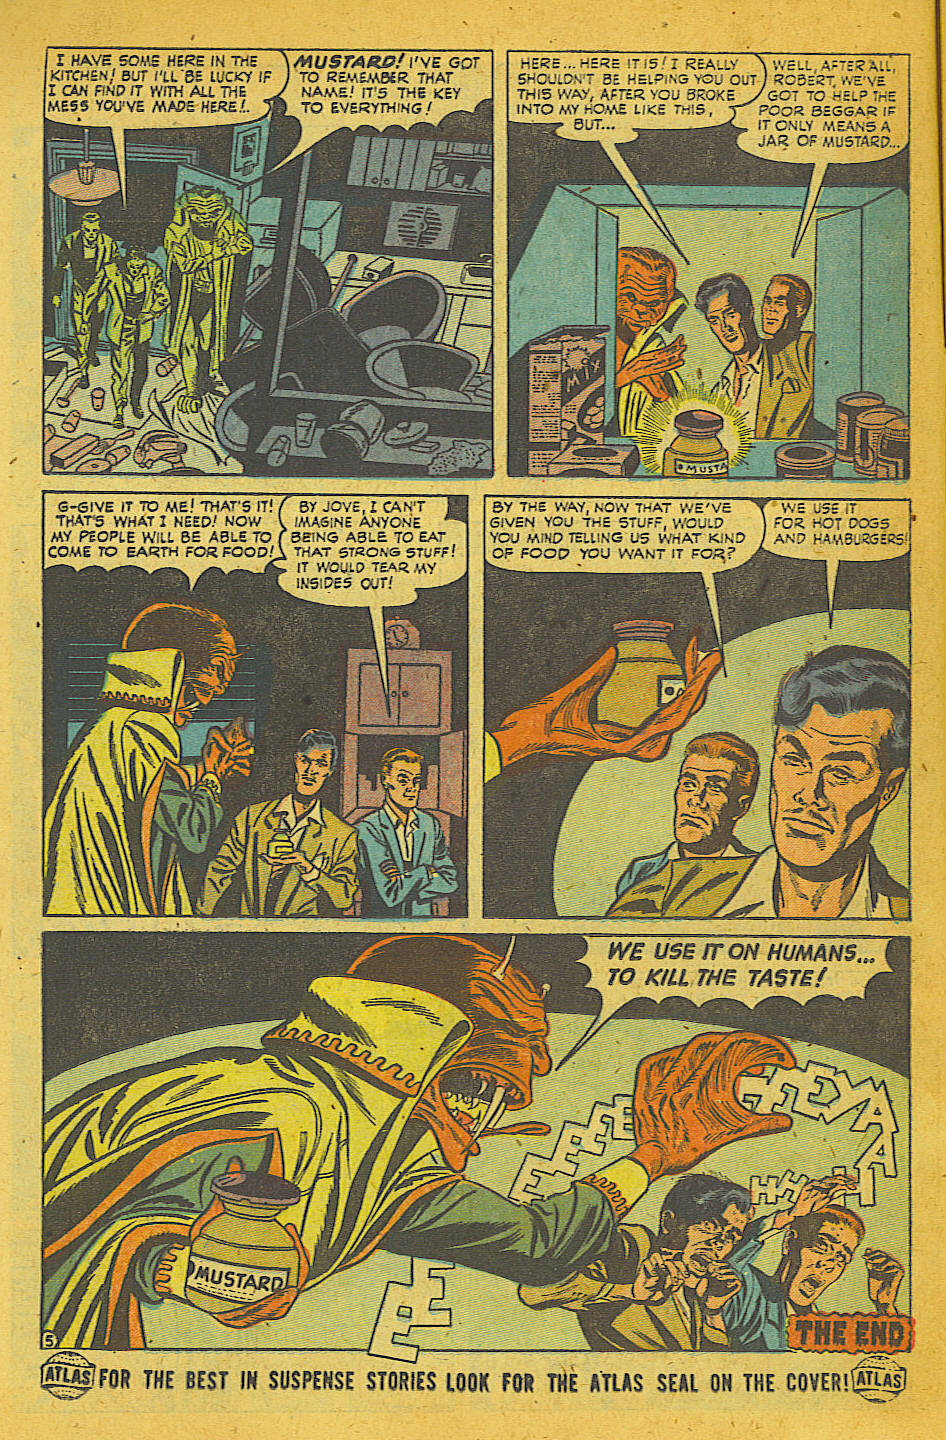 Marvel Tales (1949) 111 Page 11